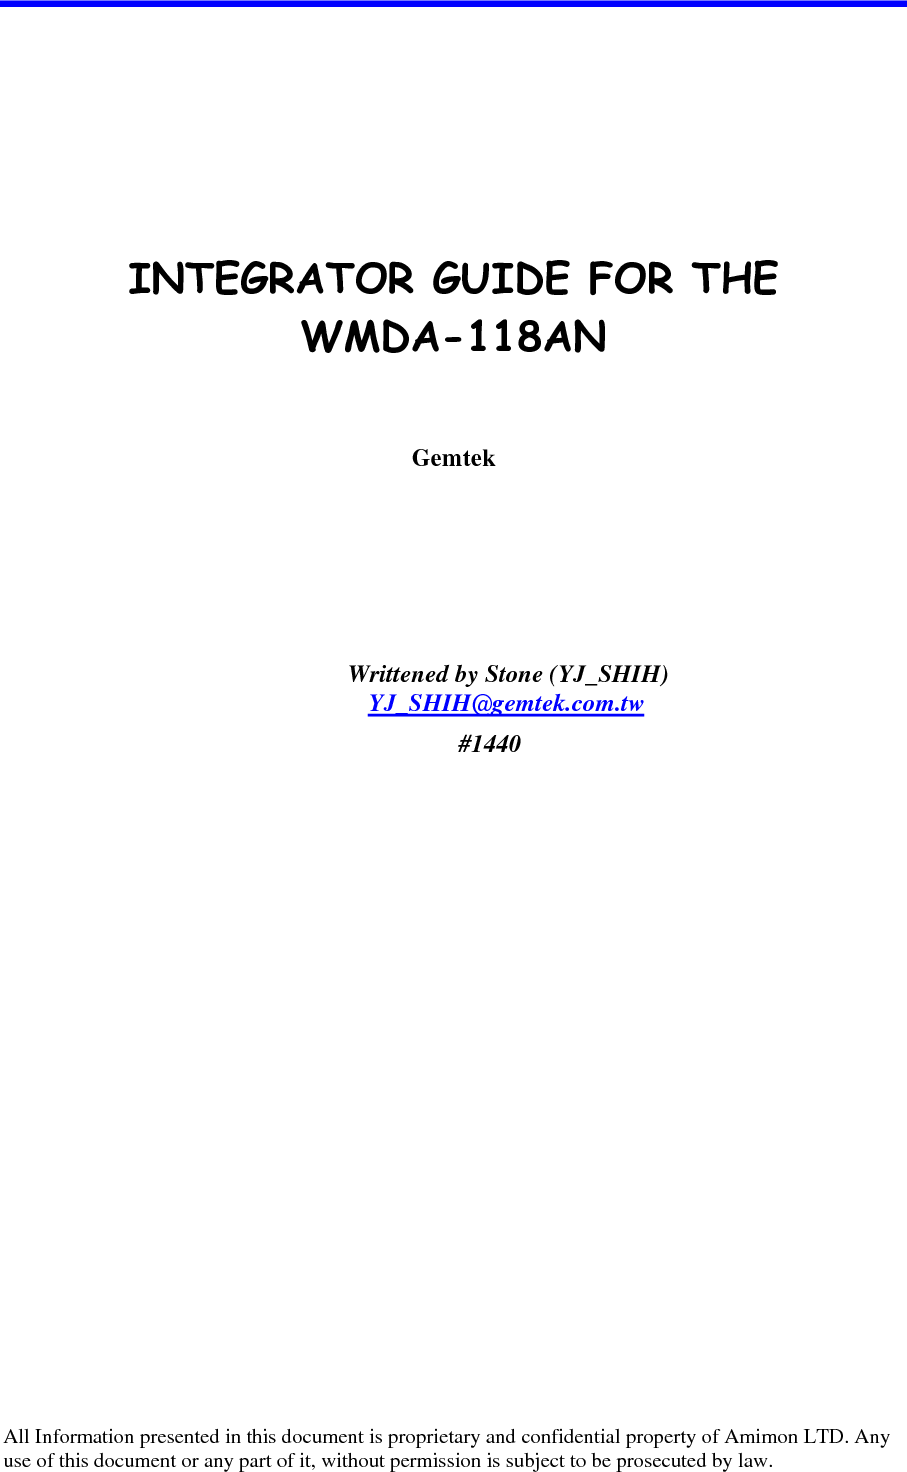         INTEGRATOR GUIDE FOR THE  WMDA-118AN    Gemtek                                                             Writtened by Stone (YJ_SHIH) YJ_SHIH@gemtek.com.tw  #1440           All Information presented in this document is proprietary and confidential property of Amimon LTD. Any use of this document or any part of it, without permission is subject to be prosecuted by law.  